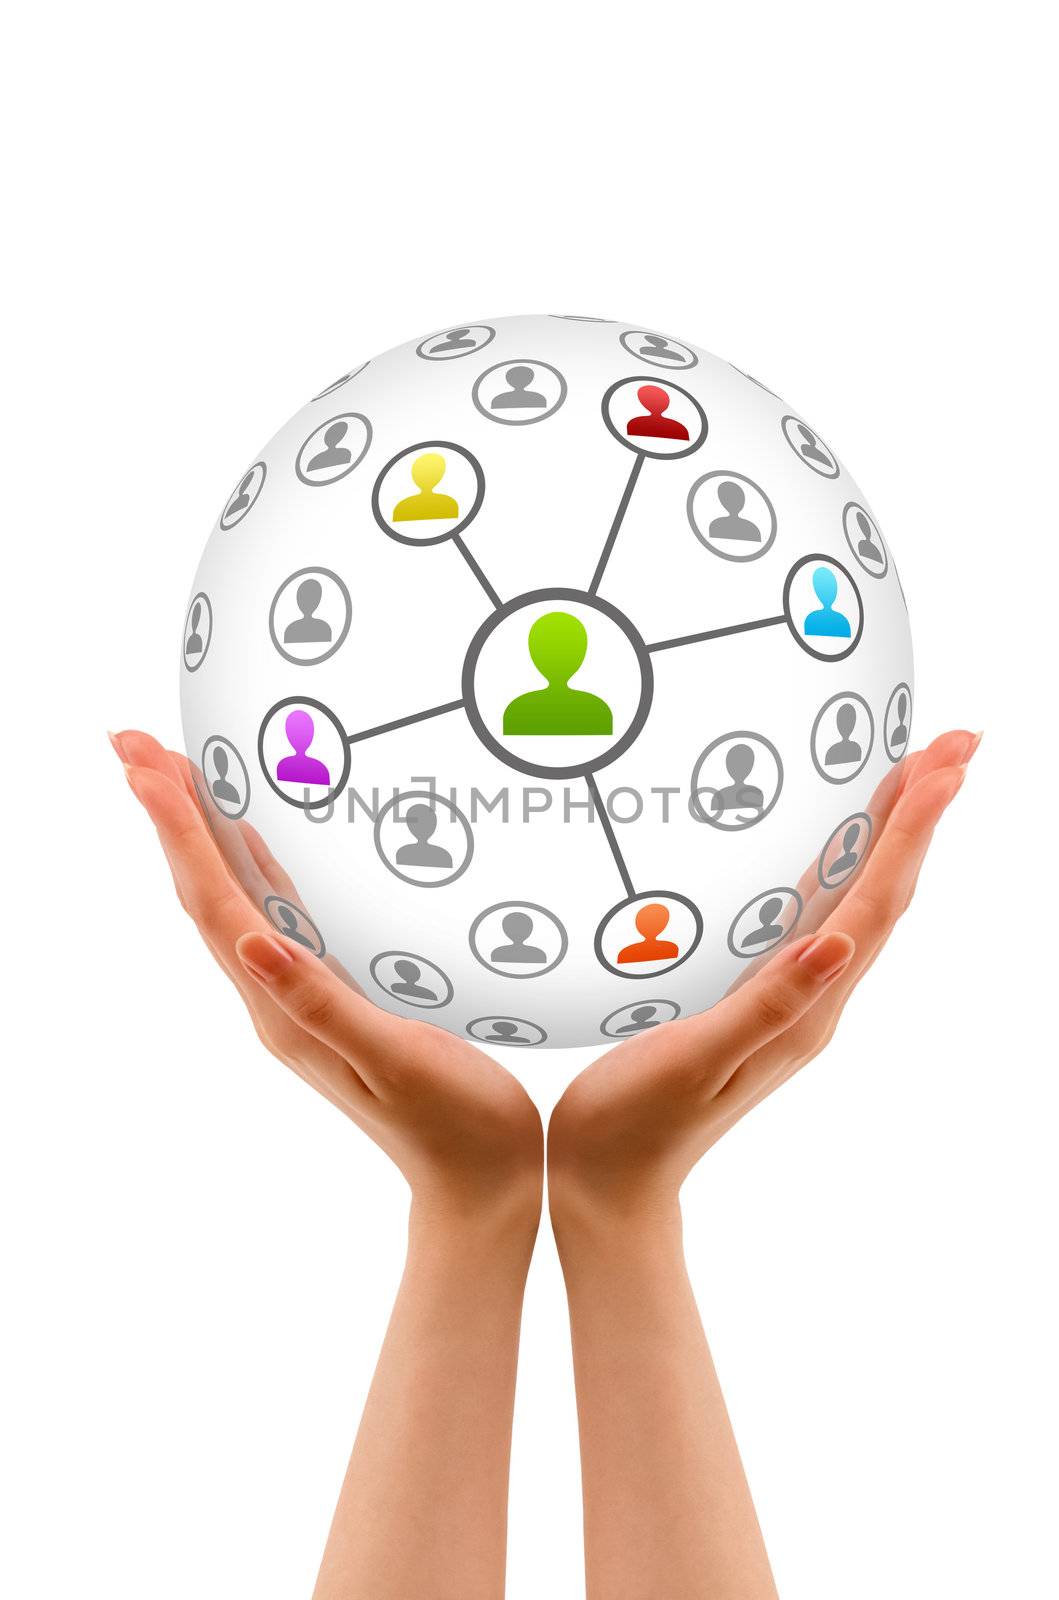 Hands holding a Friends Network Sphere on white background.